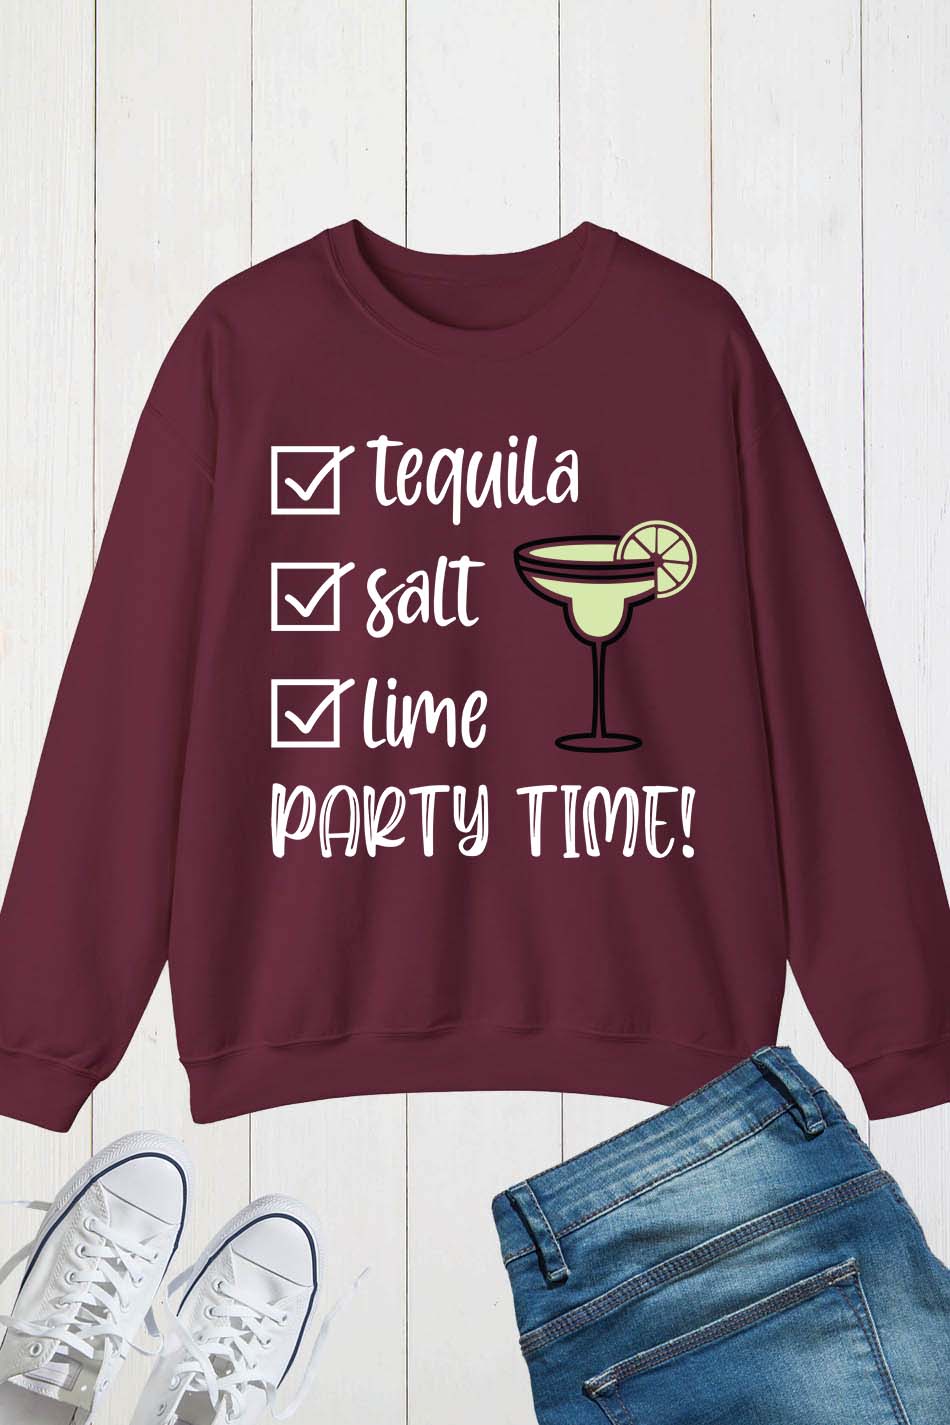 Tequila Salt Lime Party Time Sweatshirt